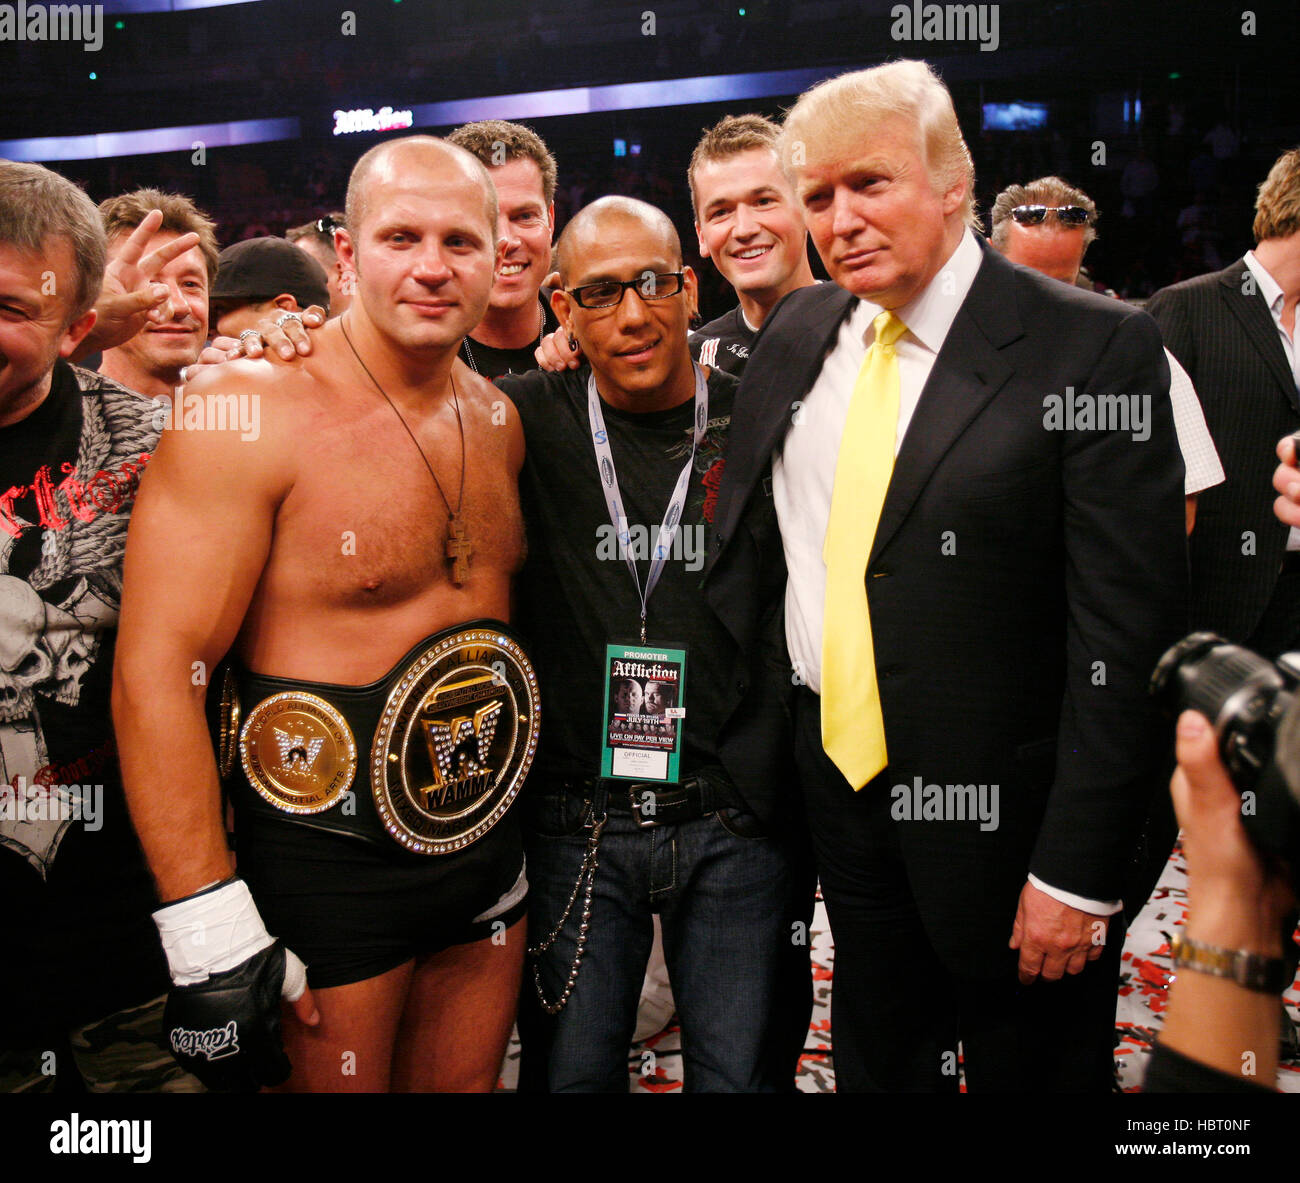 Fedor Emelianenko poses with Tom Atencio, center, and Donald Trump in the ring after defeating Tim Sylvia at Affliction's 'Banned', a mixed martial arts fight at the Honda Center on July 19, 2008 in Anaheim, California. Francis Specker Stock Photo